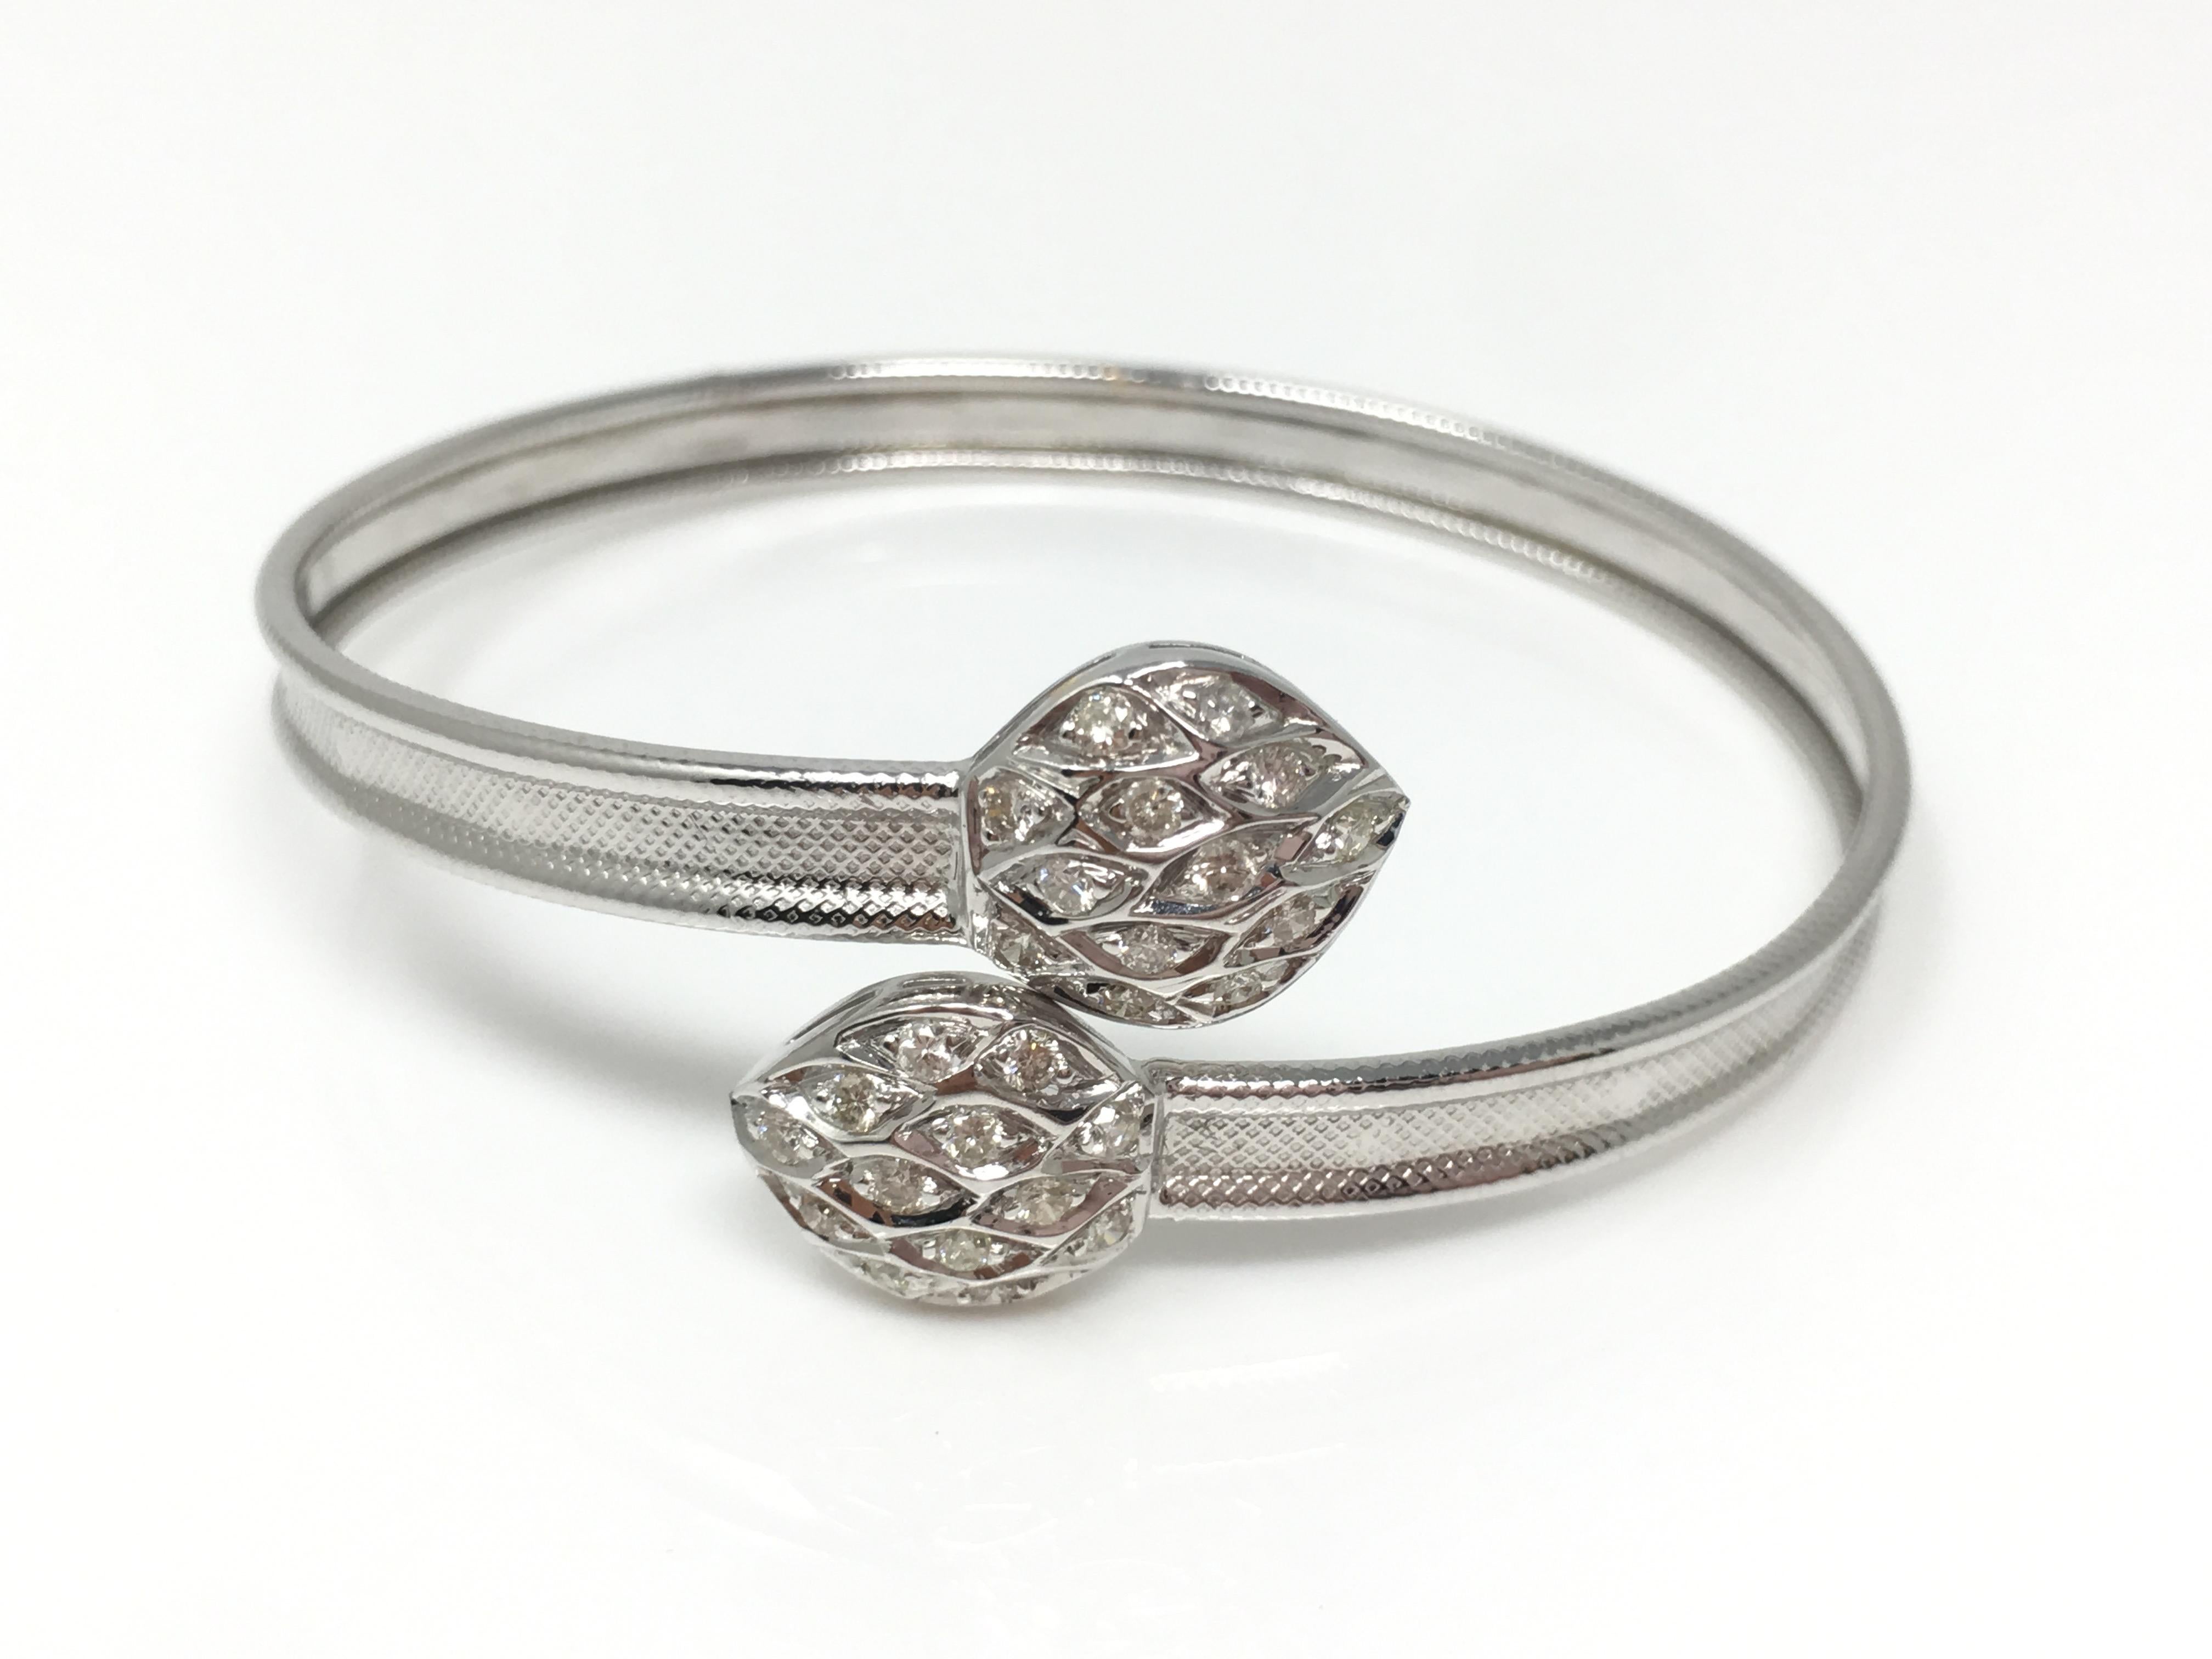 This elegant yet stylish diamond bangle is custom handmade in 18k white gold . The diamond weight is 0.60carat with GH color and VS clarity. The gold weight is 9.600 grams . The size is flexible and adaptable to most wrist sizes. 